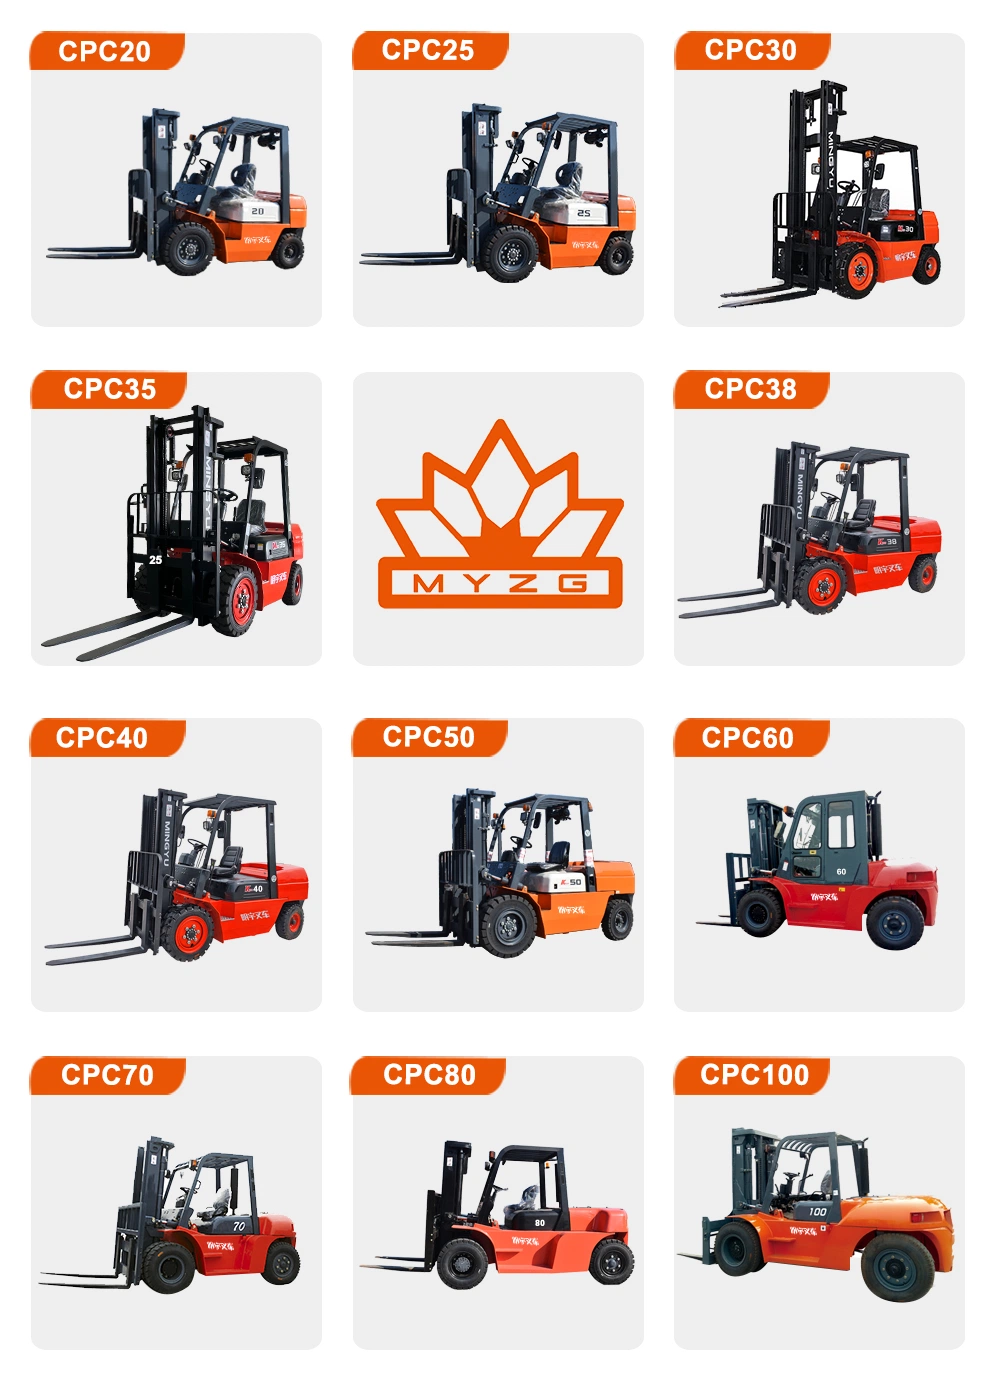 2ton 2t Counterbalanced Diesel Forklift Trucks Toyota Model CE ISO with Japanese Isuzu C240 Engine Fork Lift Hyster/Yale/Linde/Tcm/Nissan/Heli